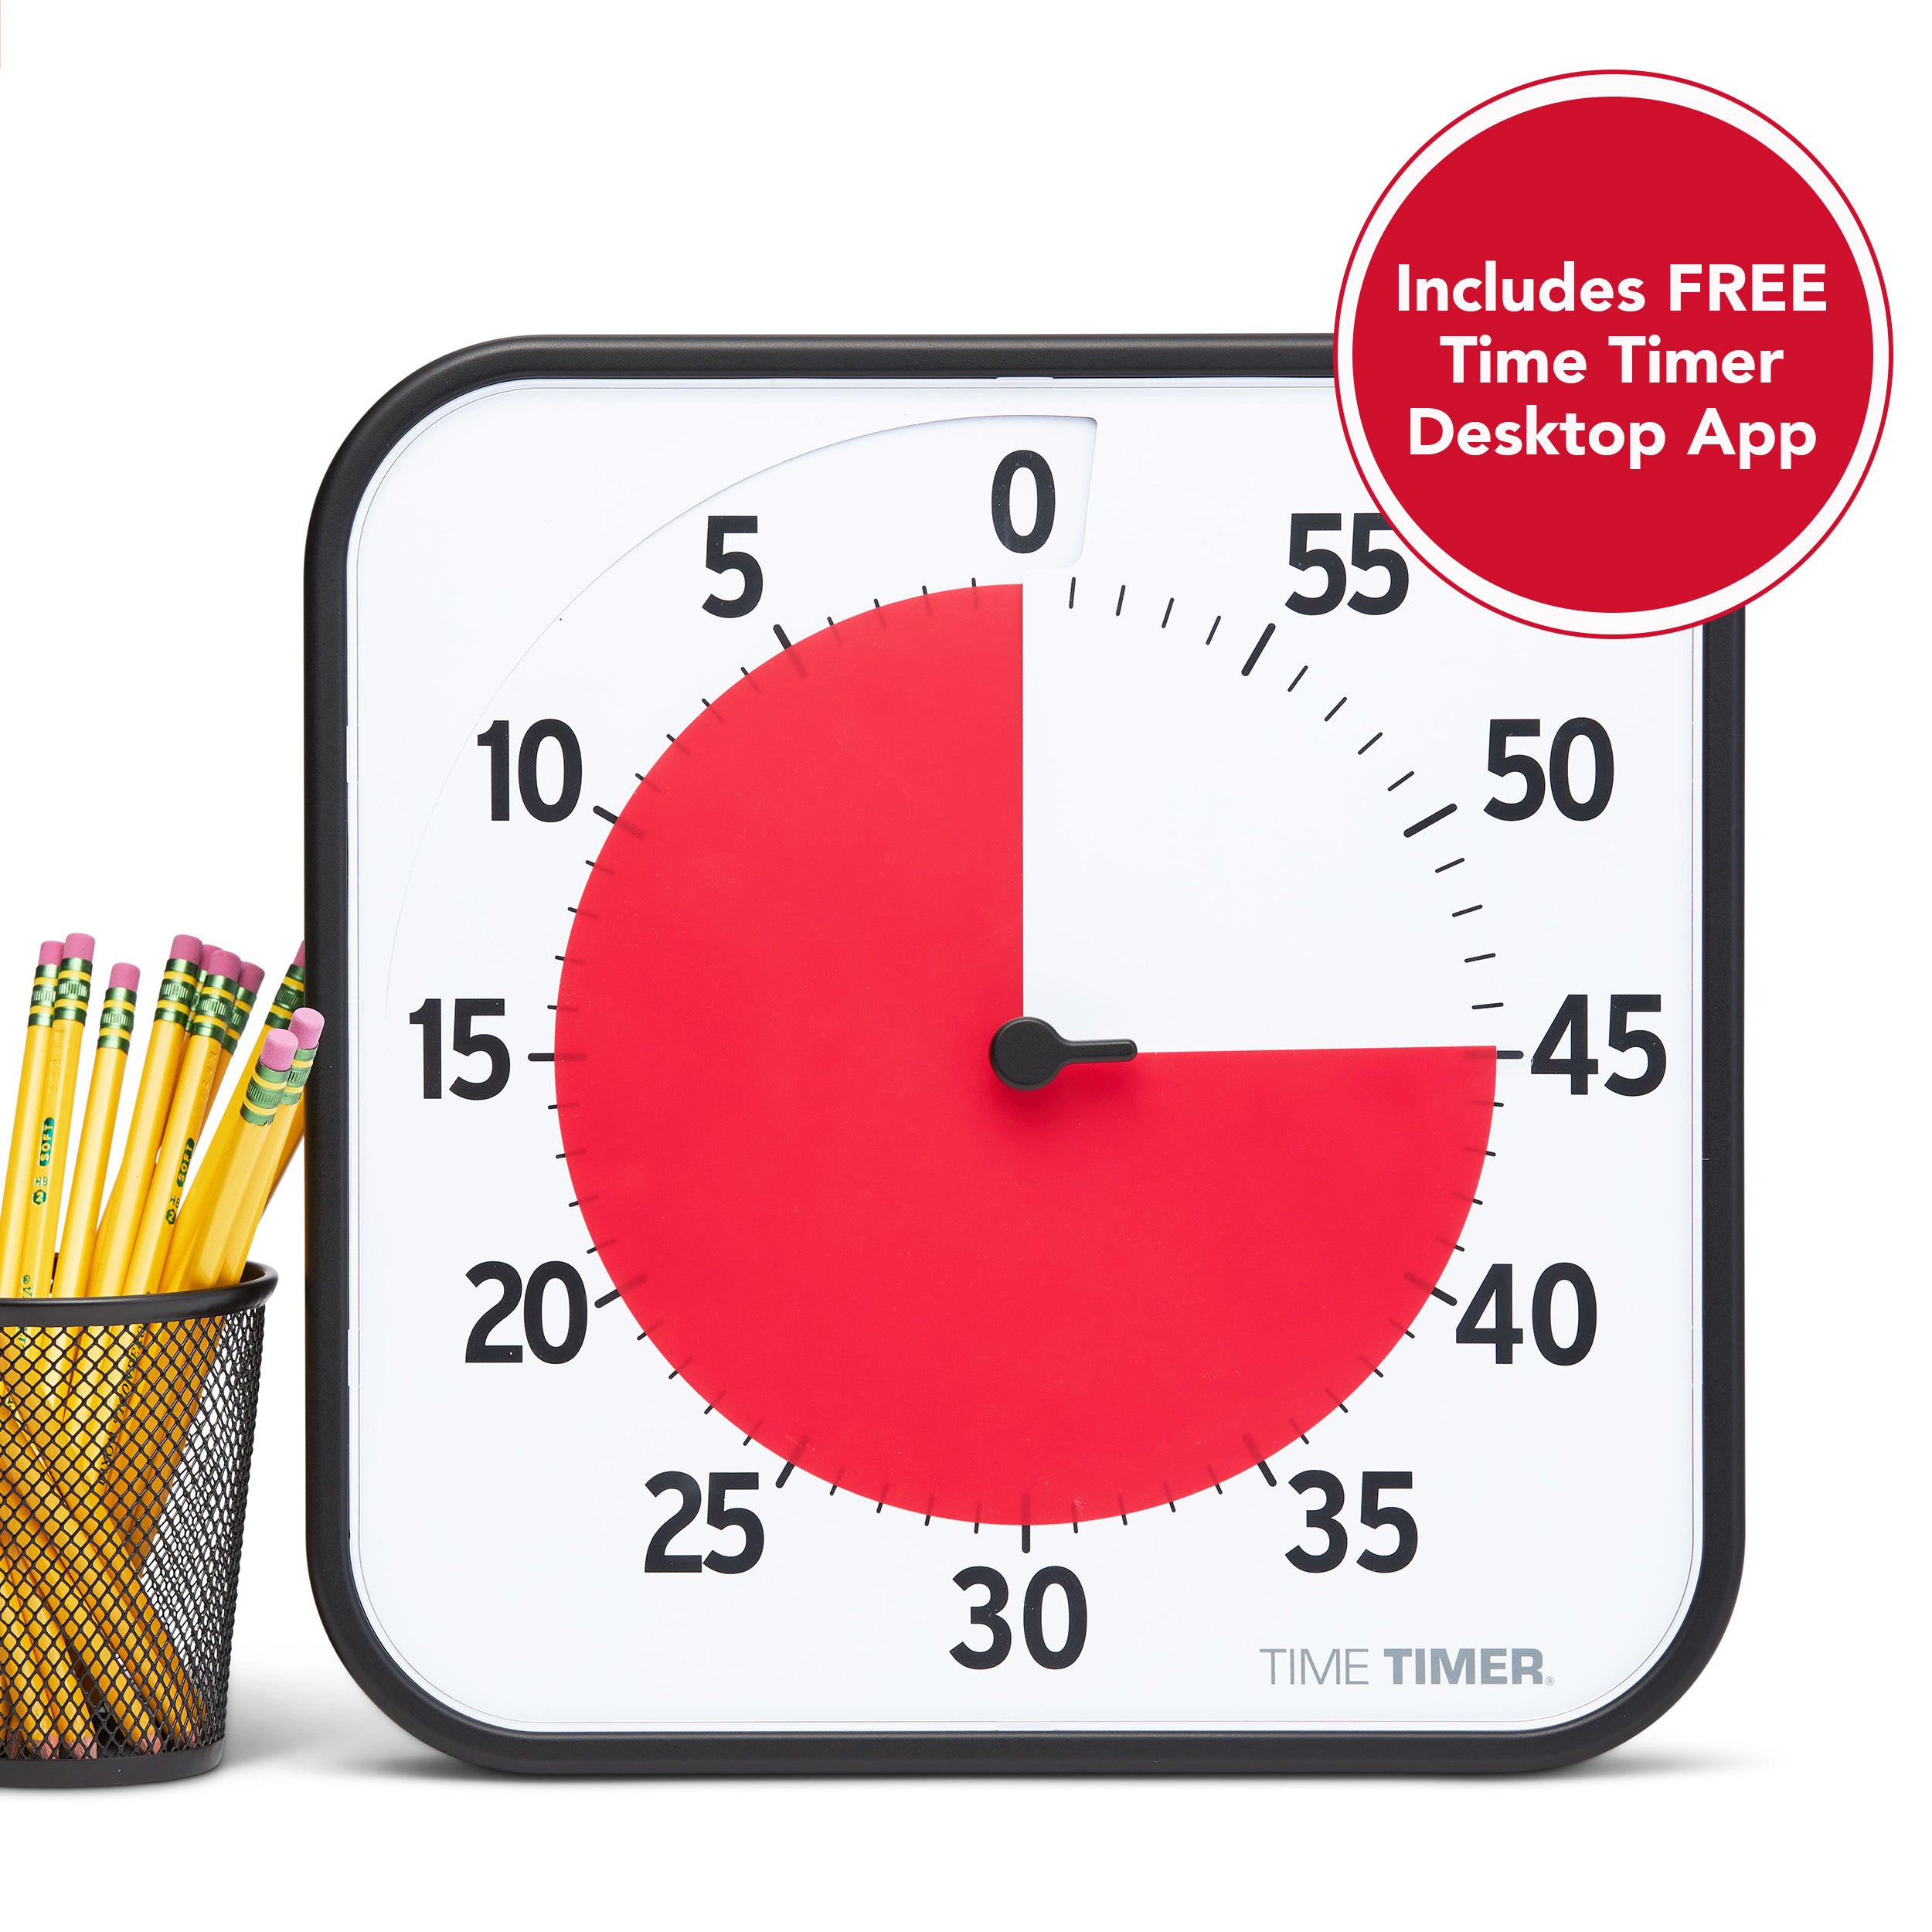 The Time Timer Original 12" - a large visual timer shown next to a pencil holder. It is twice as tall as the pencils. The 60 minute visual timer includes a FREE Time Timer Desktop App as stated in the graphic.